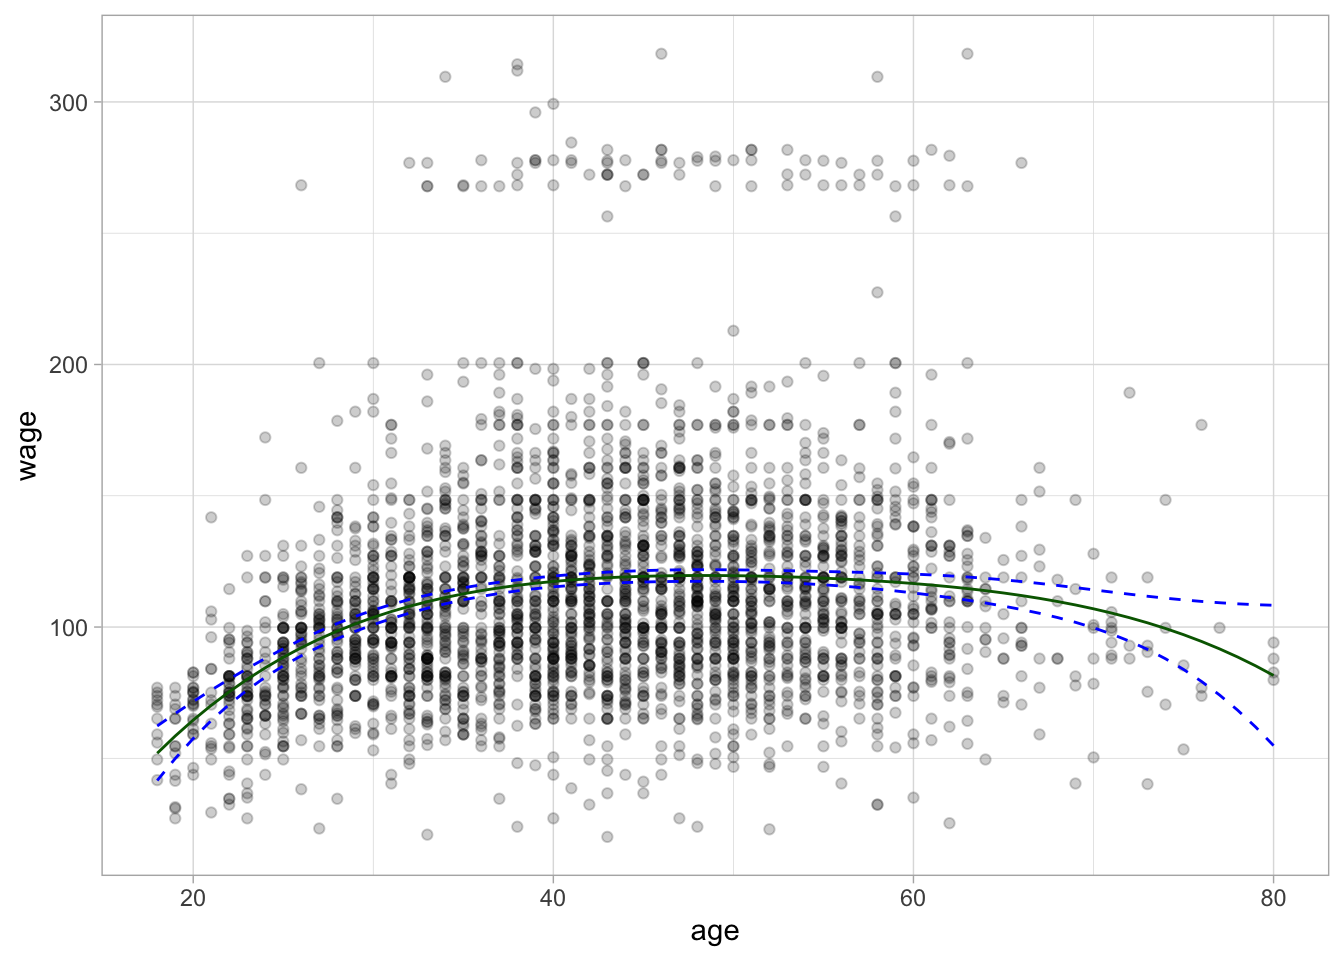 Scatter chart, age against the x-axis and wage against y-axis. Fairly normally distributed around wage == 100, with some another blob around wage == 275. A curve in dark green follows the middle of the data with two dottled curves follows closely around.